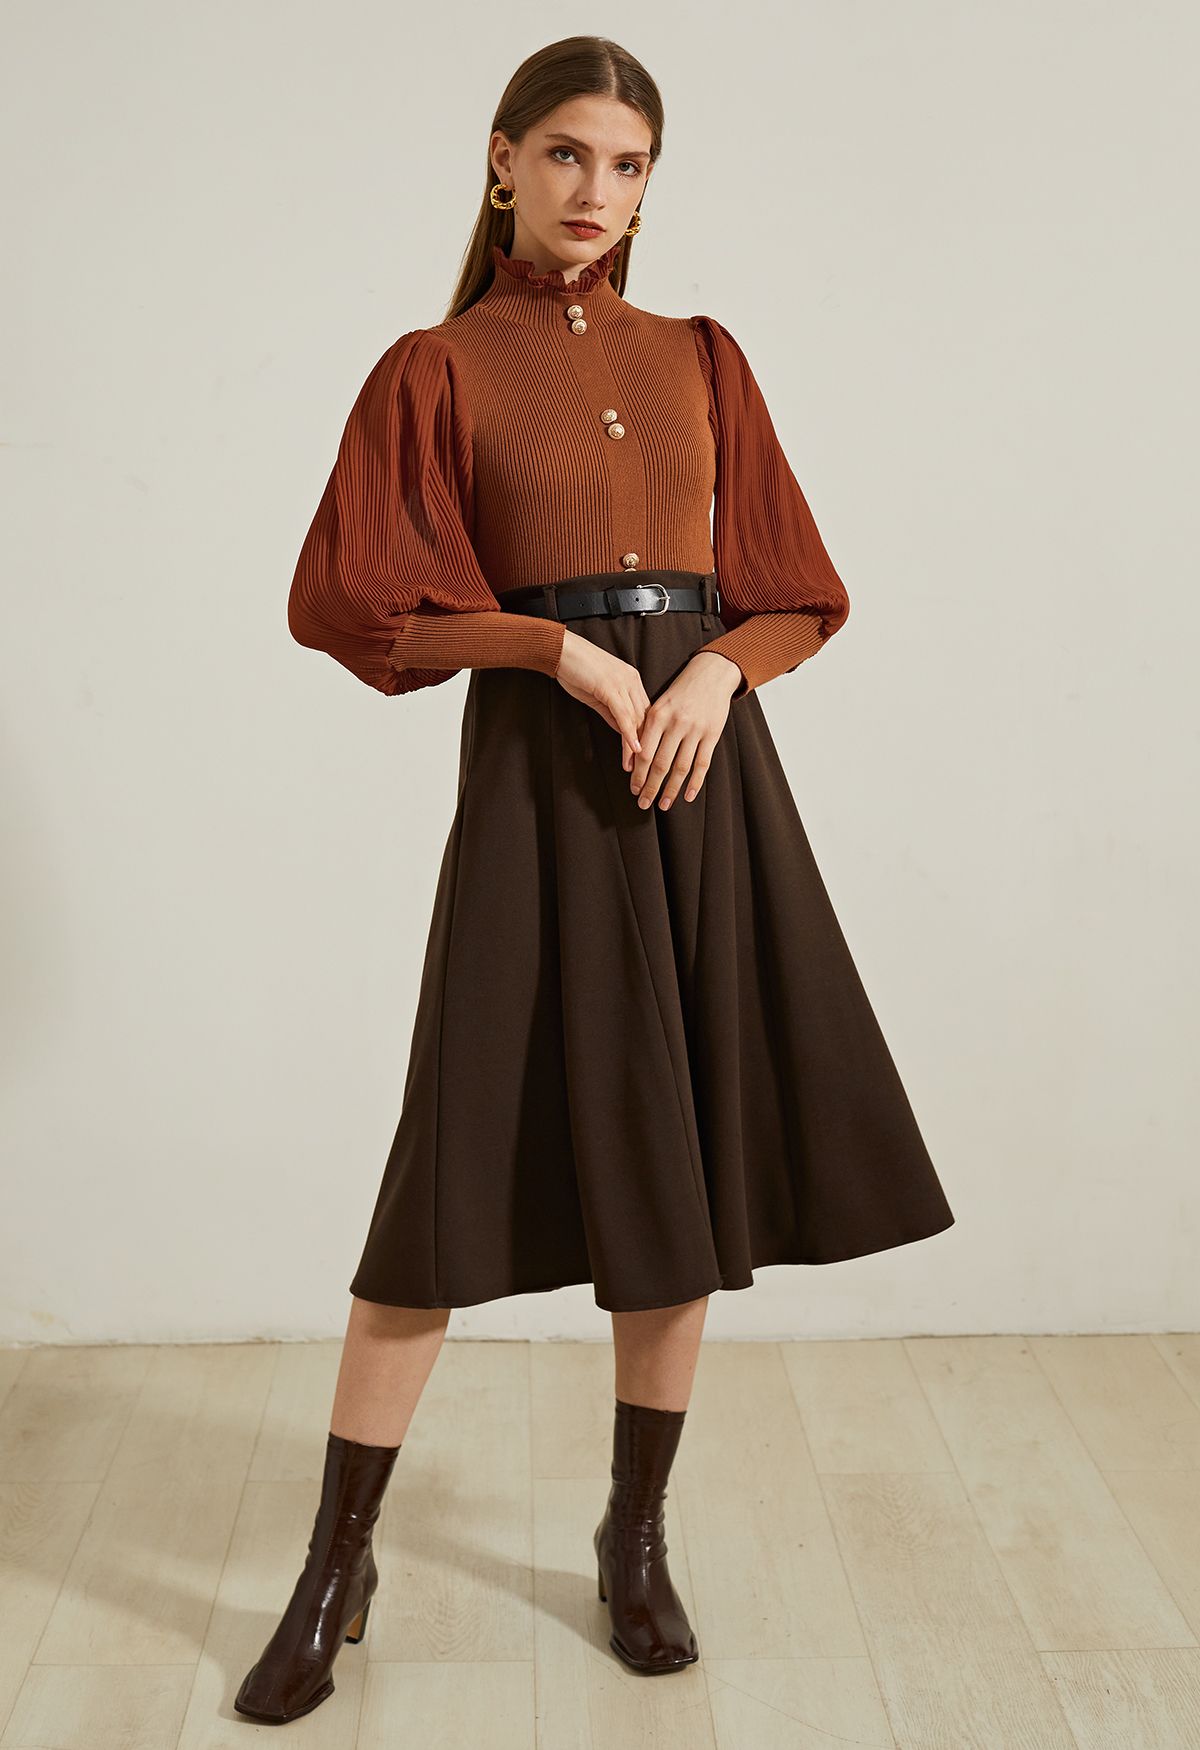 Solid Color Belted Flare Midi Skirt in Brown